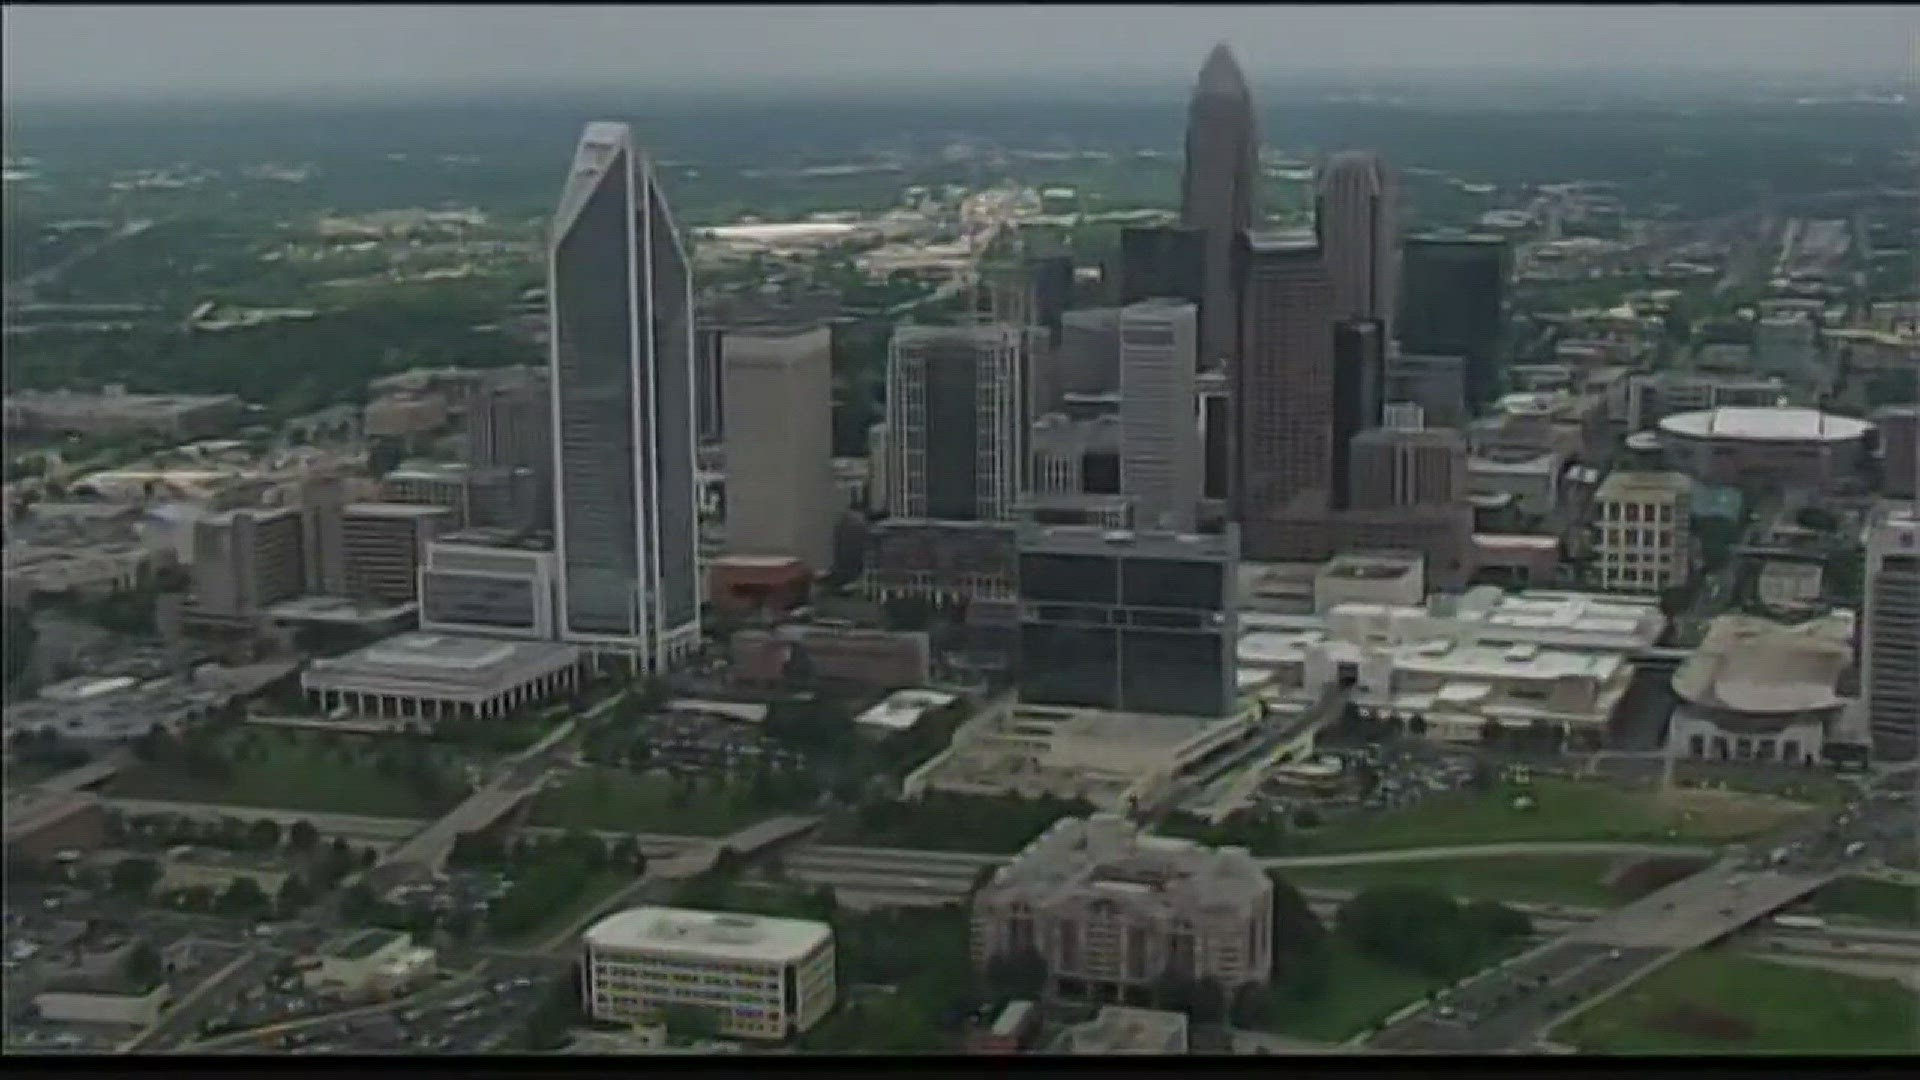 The Queen City is one of 25 U.S. cities now on the "shortlist" to host the World Cup.